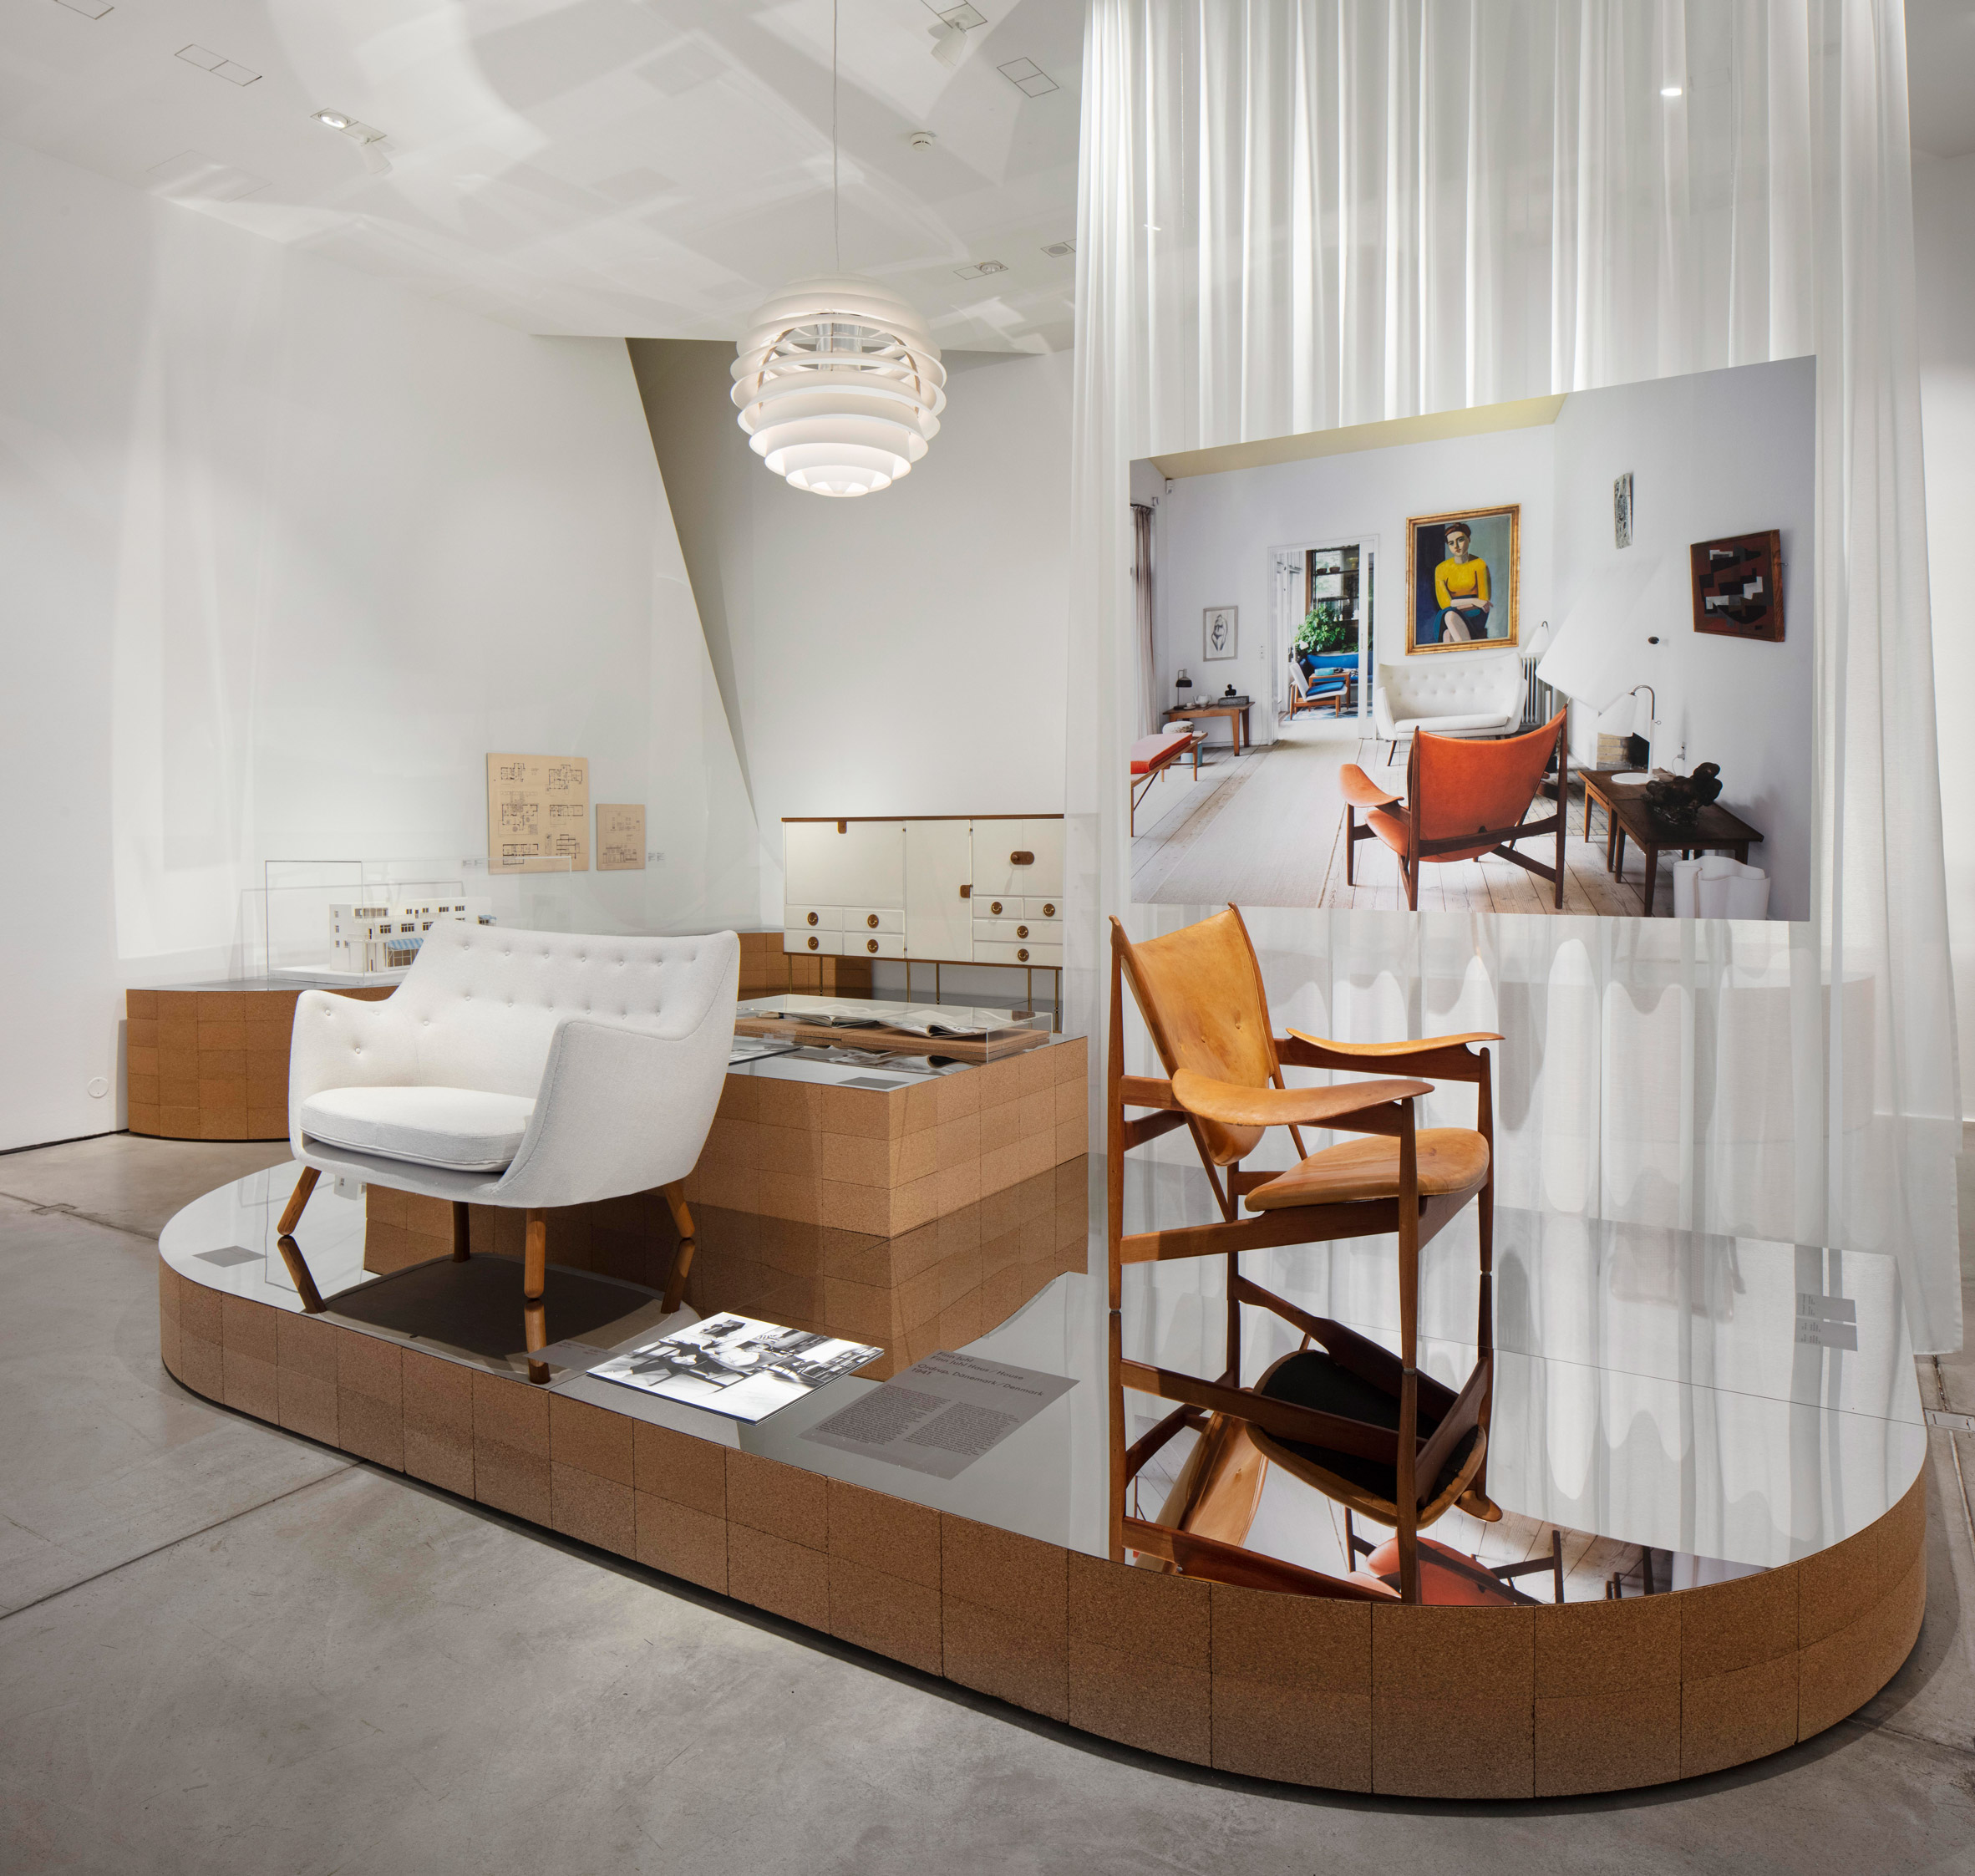 Home Stories: 100 Years, 20 Visionary Interiors exhibition at the Vitra Design Museum